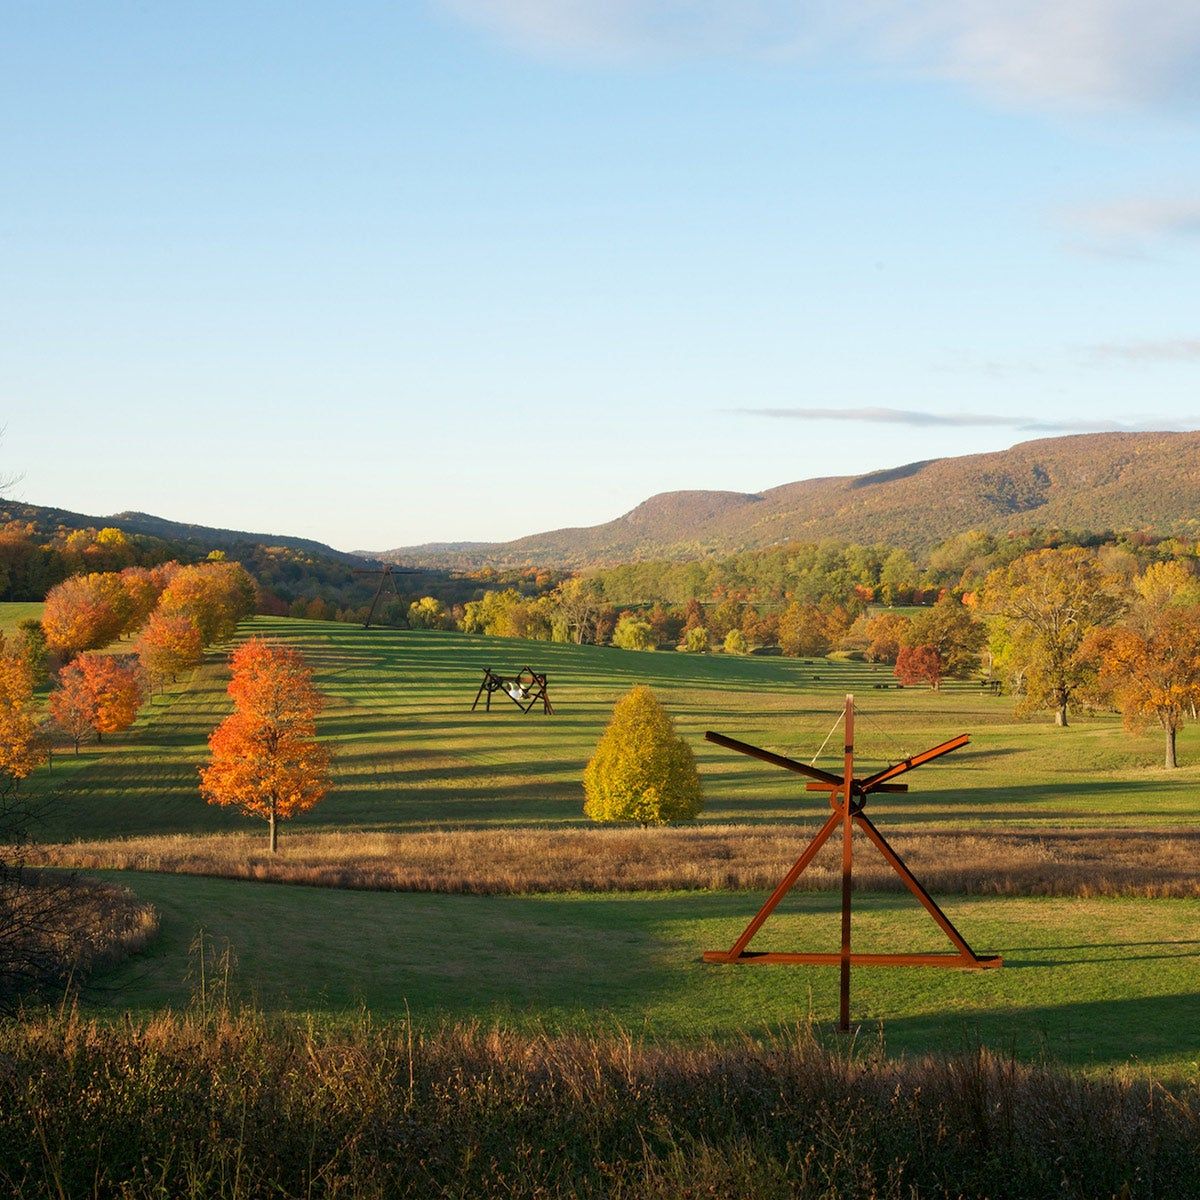 Storm King Art Center in the fall; depicted are sculptures created by Mark di Suvero in a large valley.